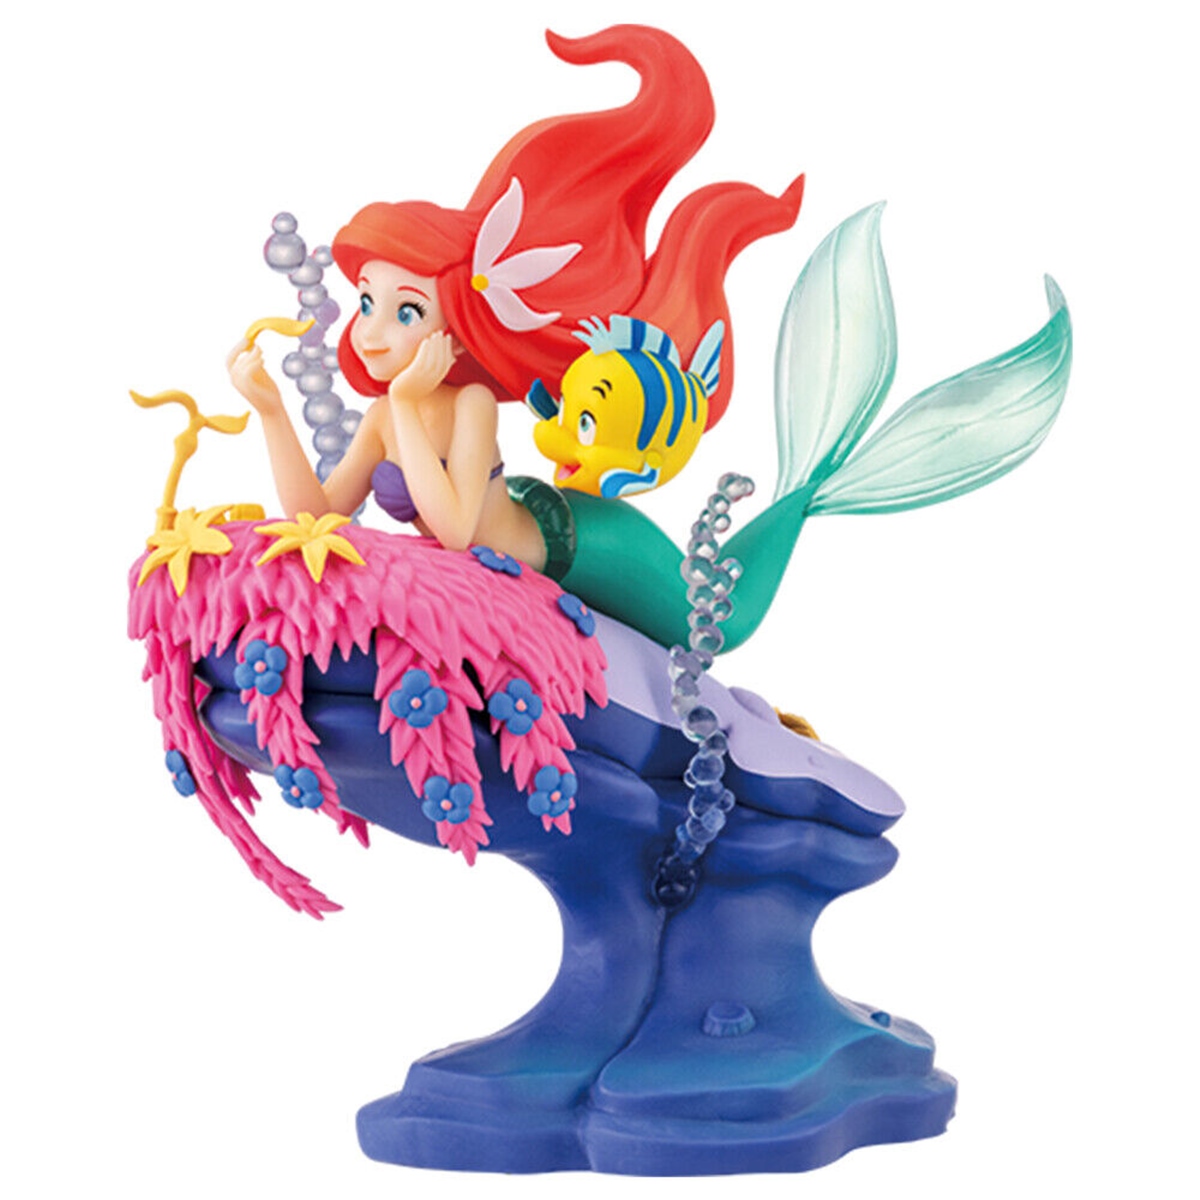 11 Best The Little Mermaid Figurine for 2023